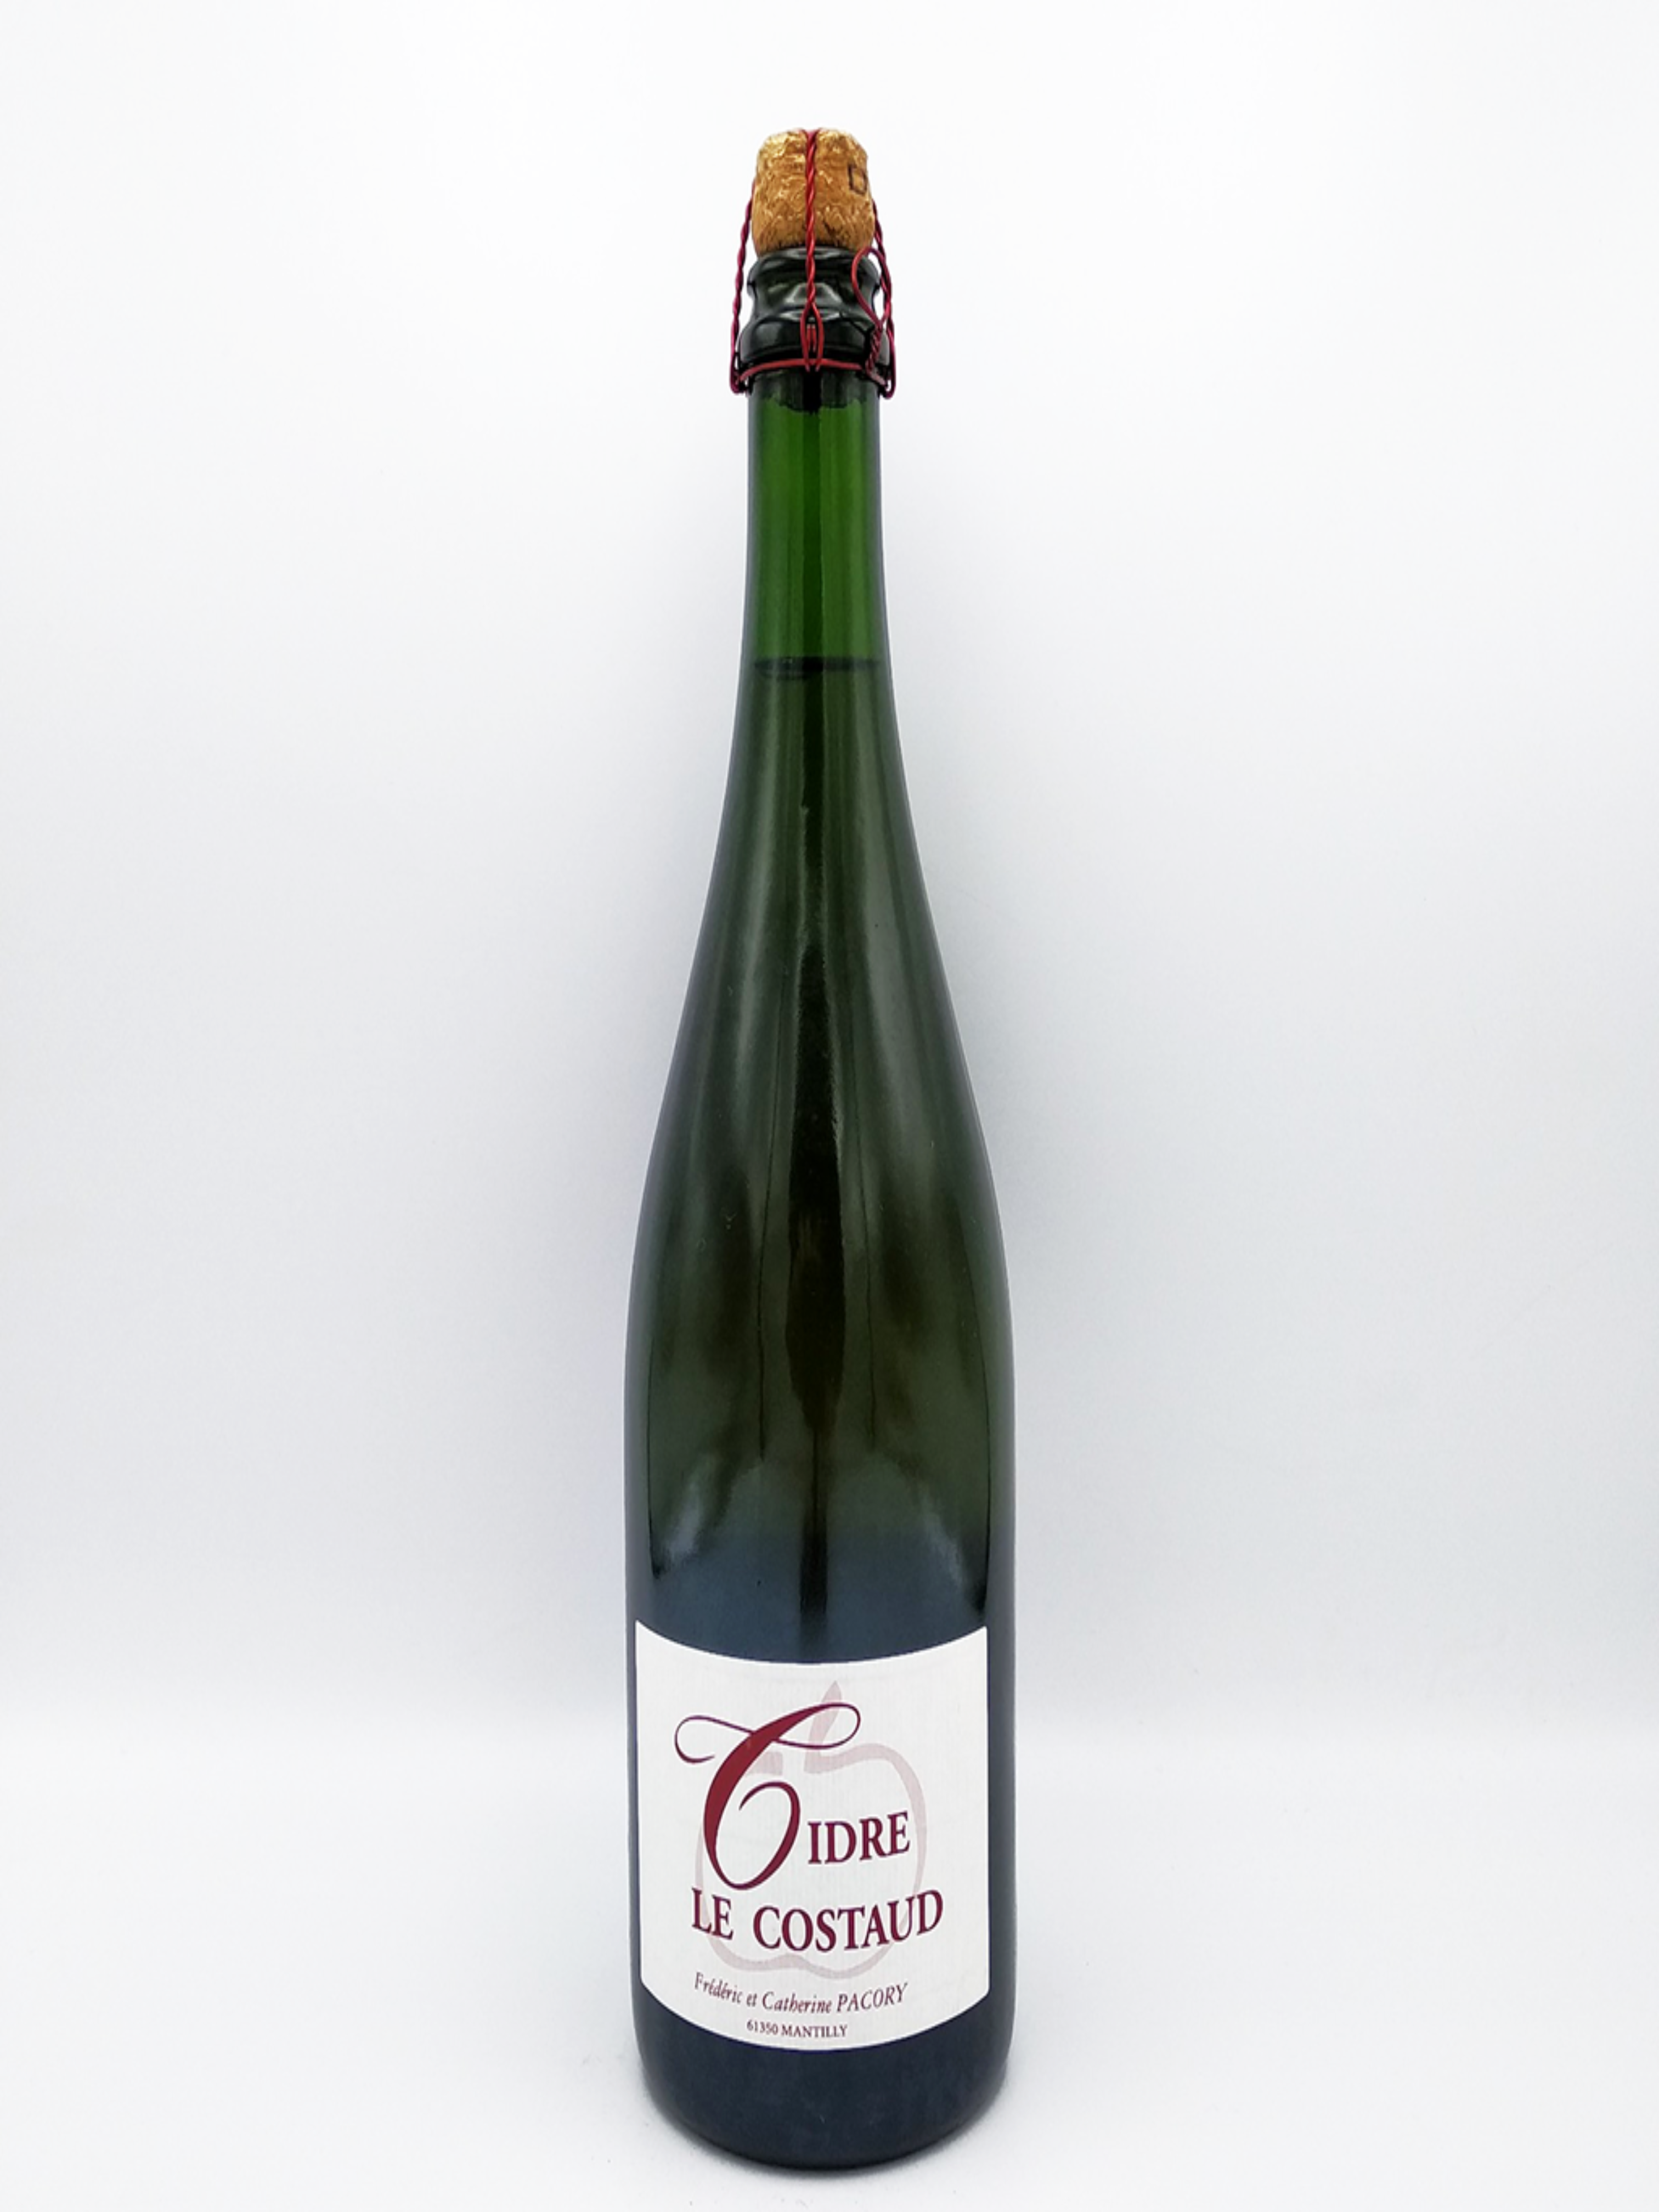 Cider "Le Costaud" 75cl - Pacory